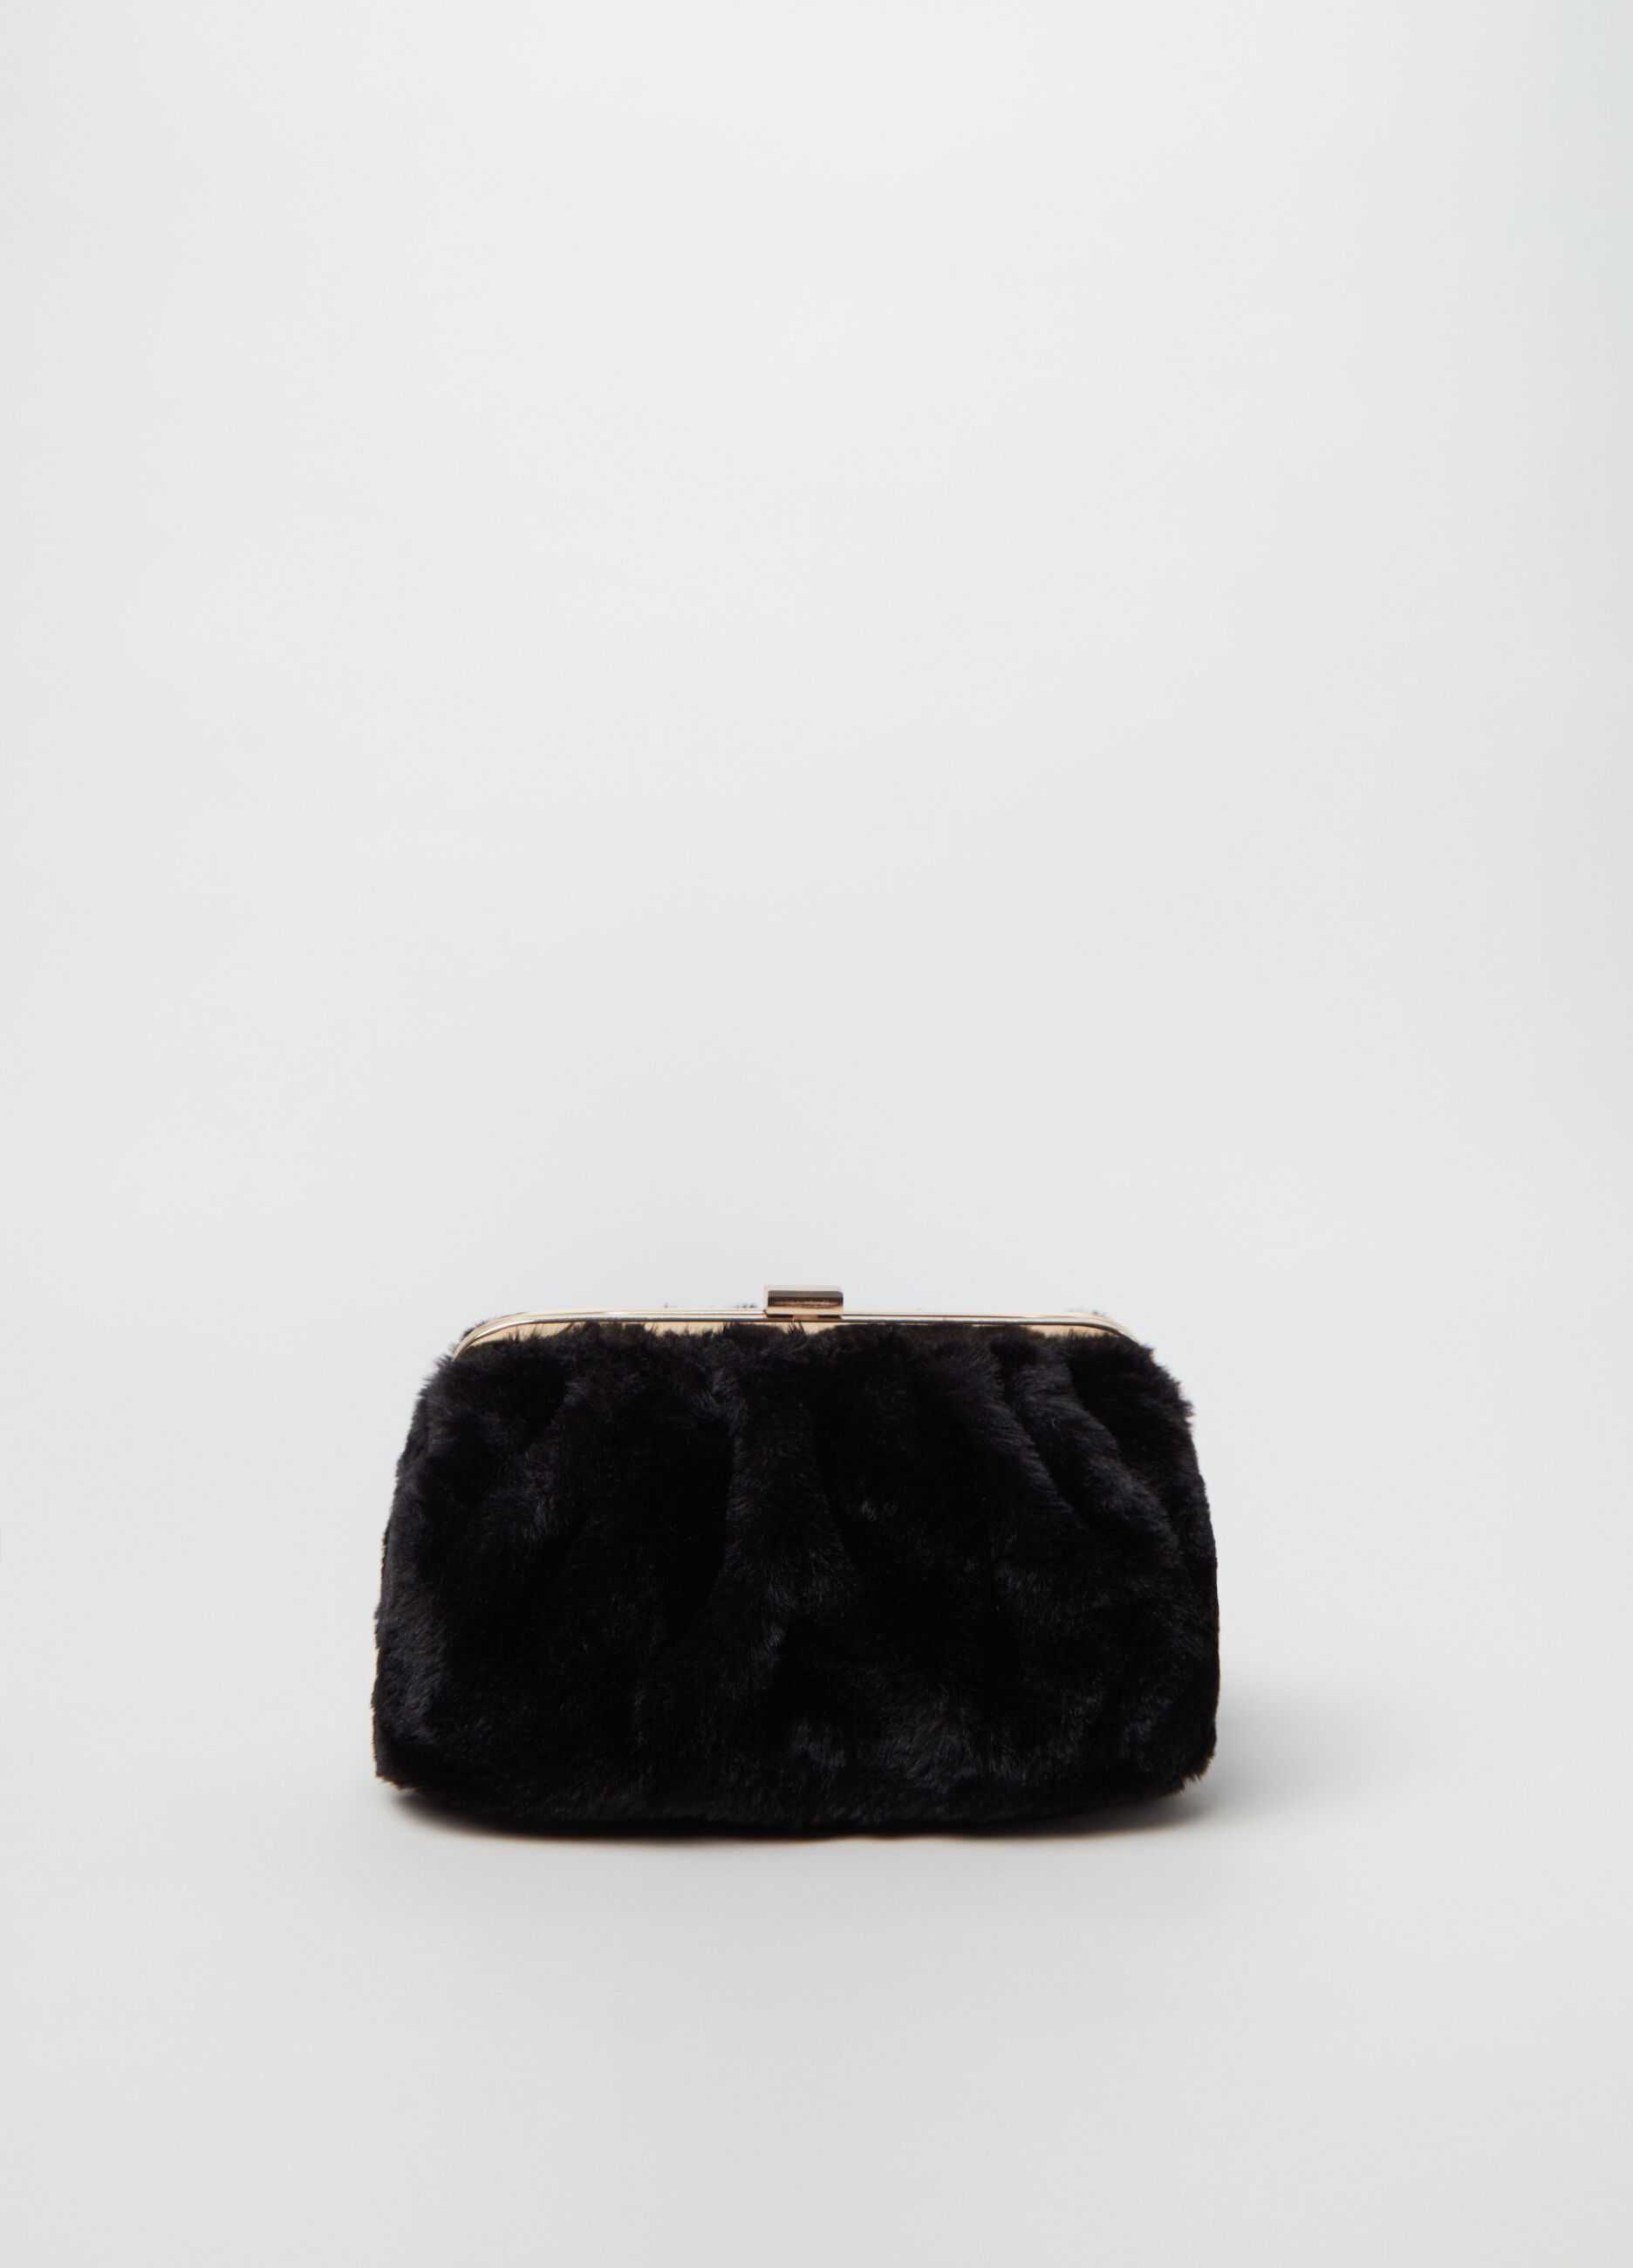 Plush Faux Fur Crossbody Bag For Women Autumn/Winter Purse With Phone  Pocket And Sweet Wallet From Webbag, $11.52 | DHgate.Com